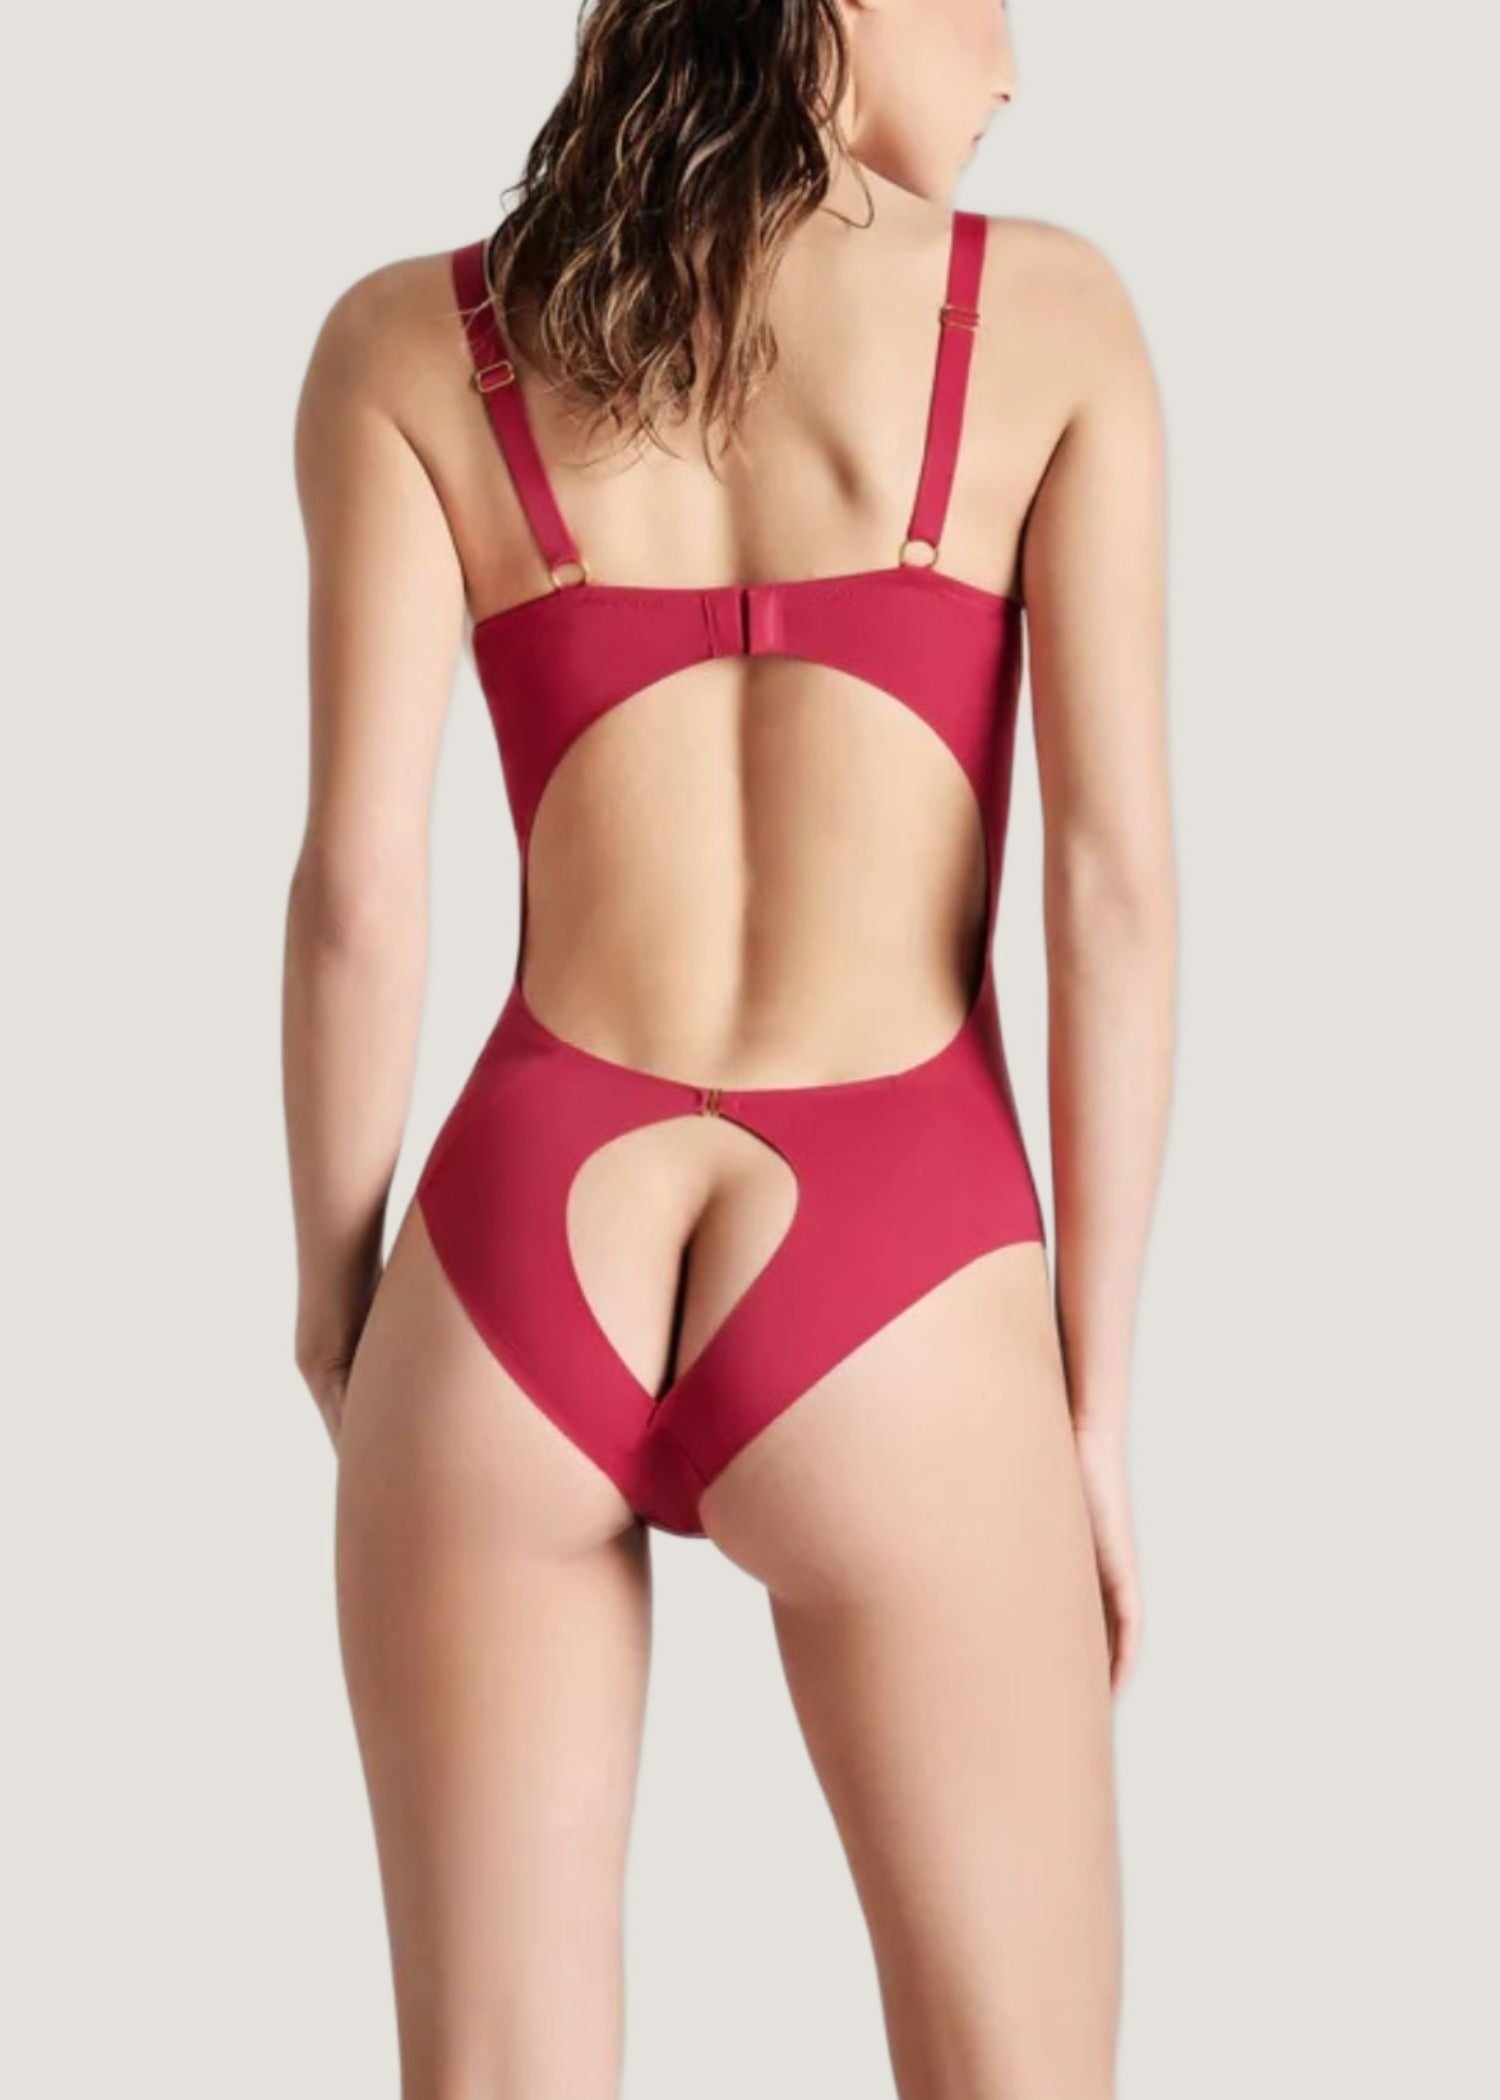 Maison Close Tapage Nocturne Open Cup Bodysuit (Red) - Cupless, Ouvert Back | Avec Amour Sexy Lingerie